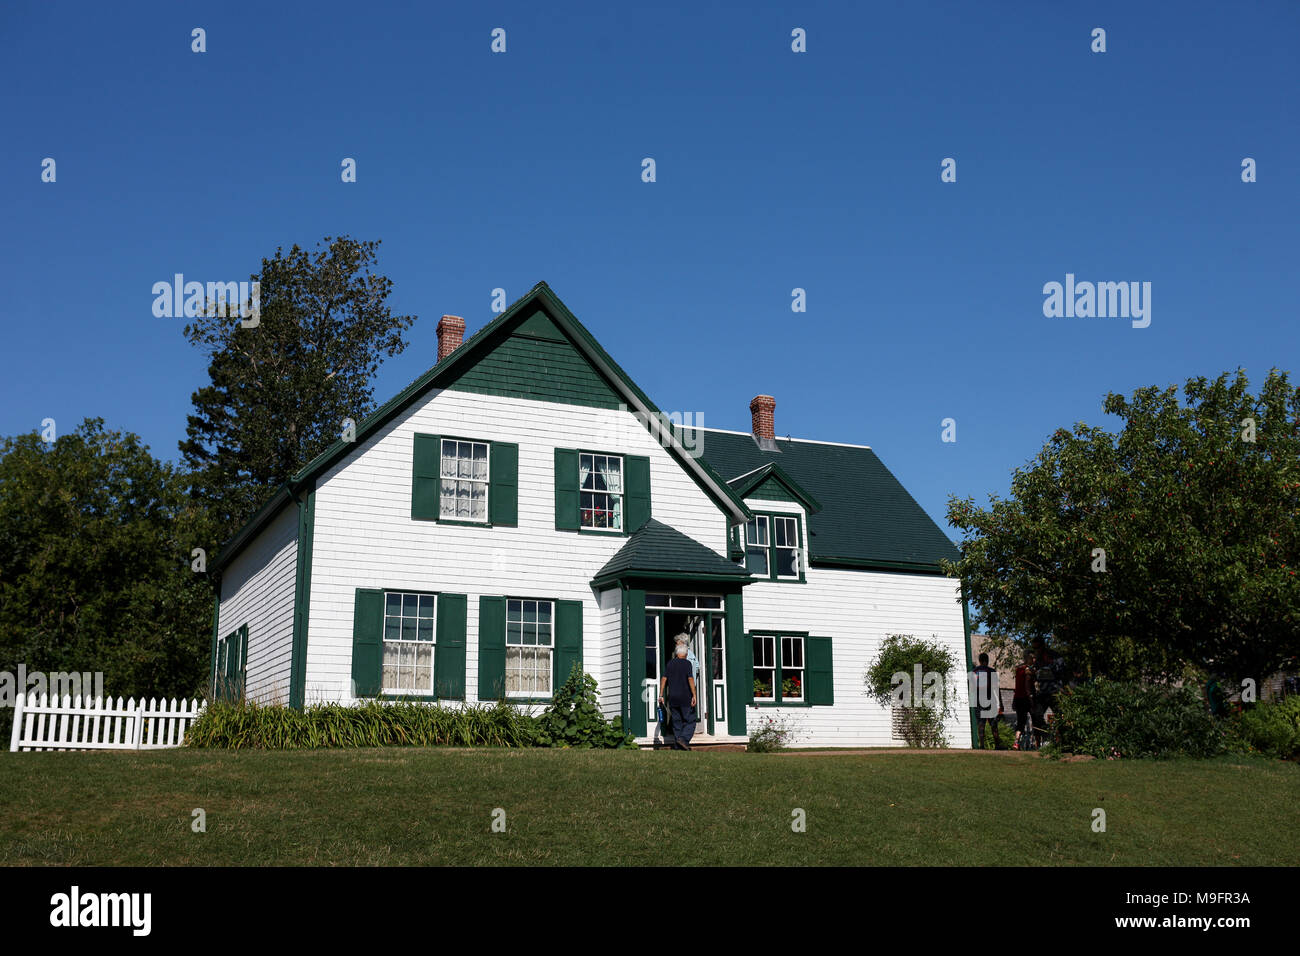 The iconic Green Gables farm house from the Lucy Maud Montgomery novel Anne of Green Gables. Stock Photo